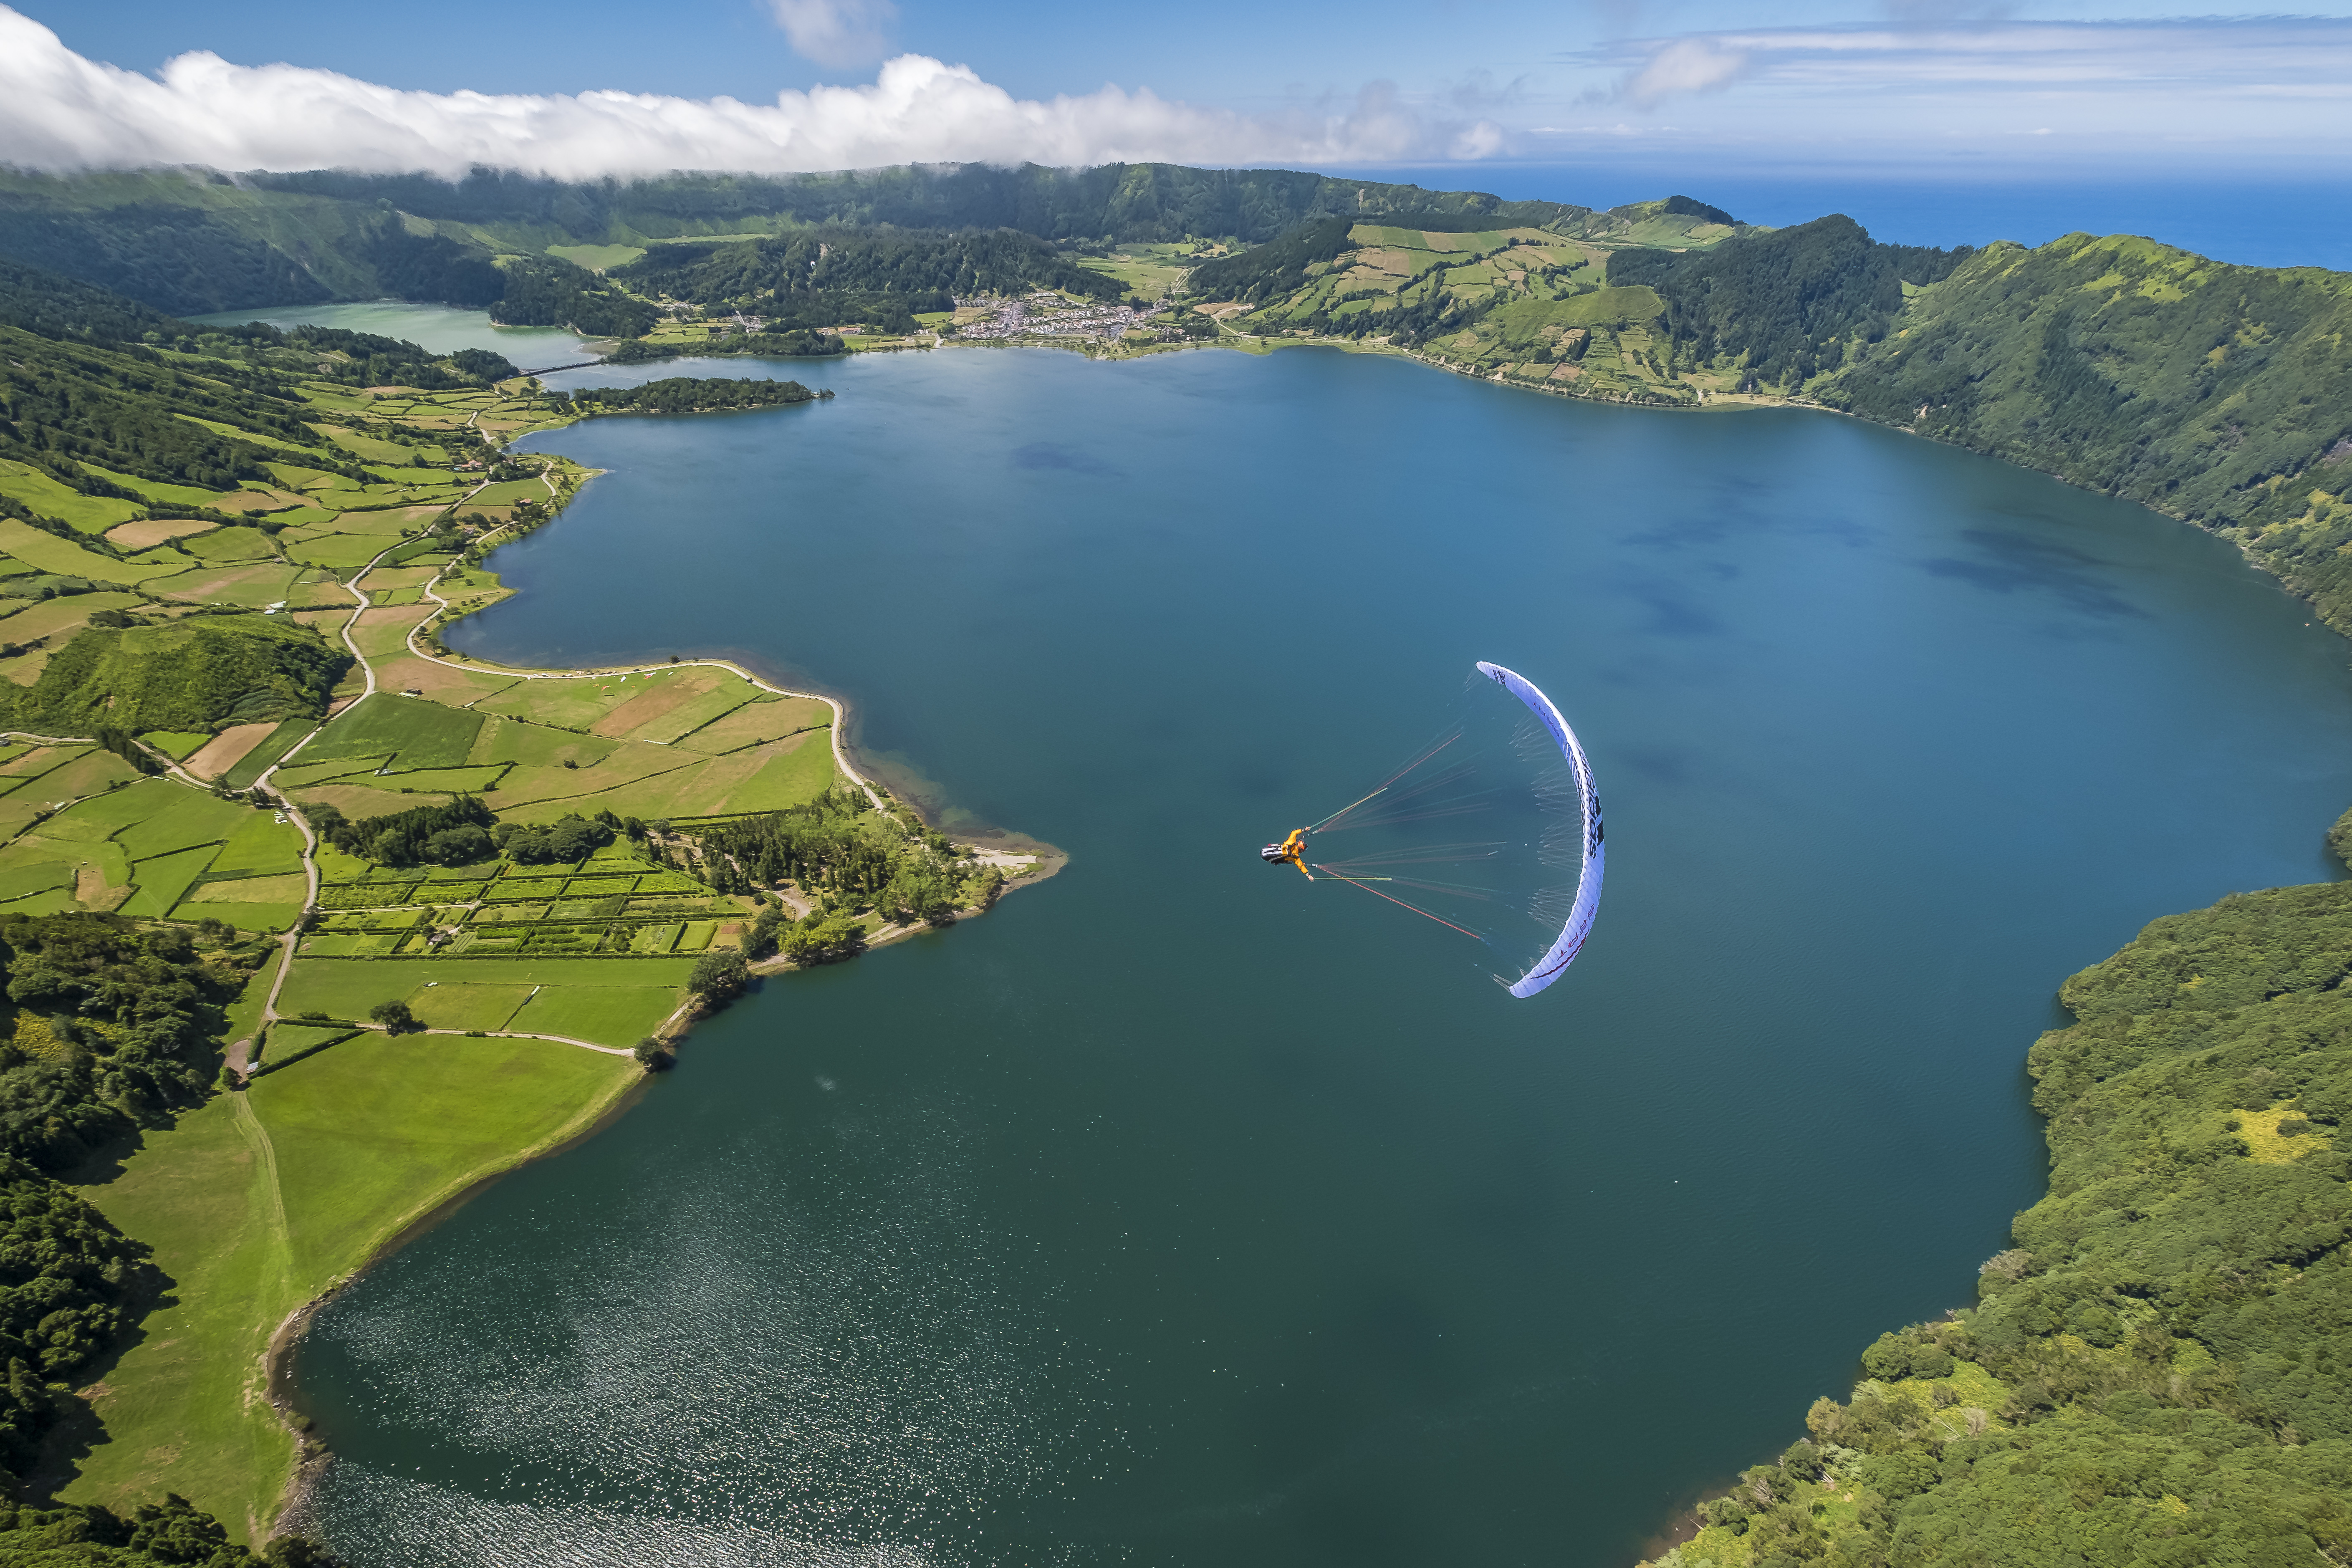 The Azores Island of Sao Miguel